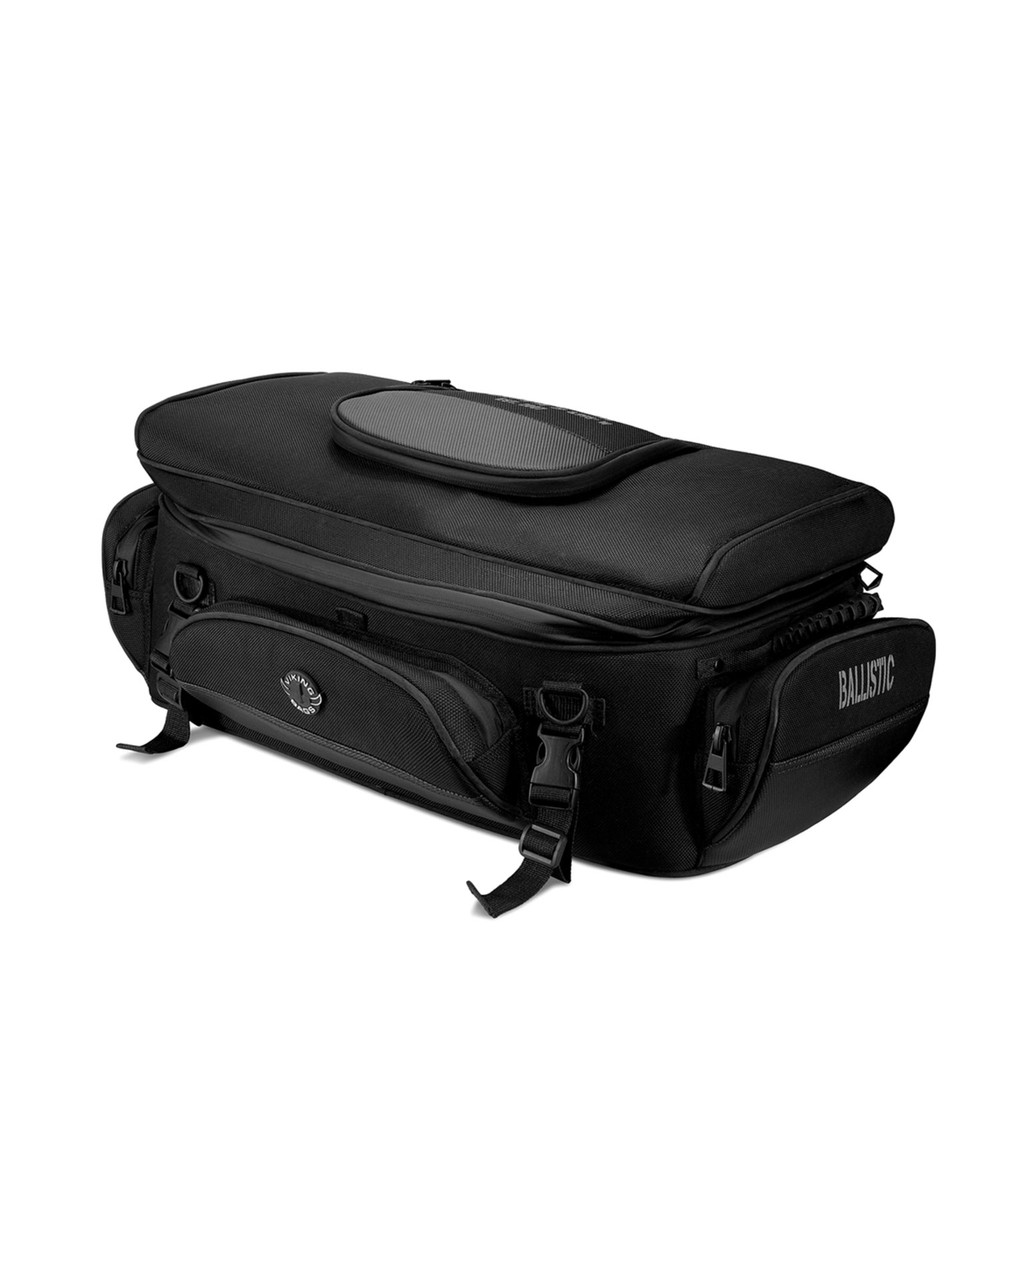 Harley Davidson Pan America Sports Panniers Saddlebag Side Liners Side Case  Trunk Liners Bags, Classic, Black - Pair